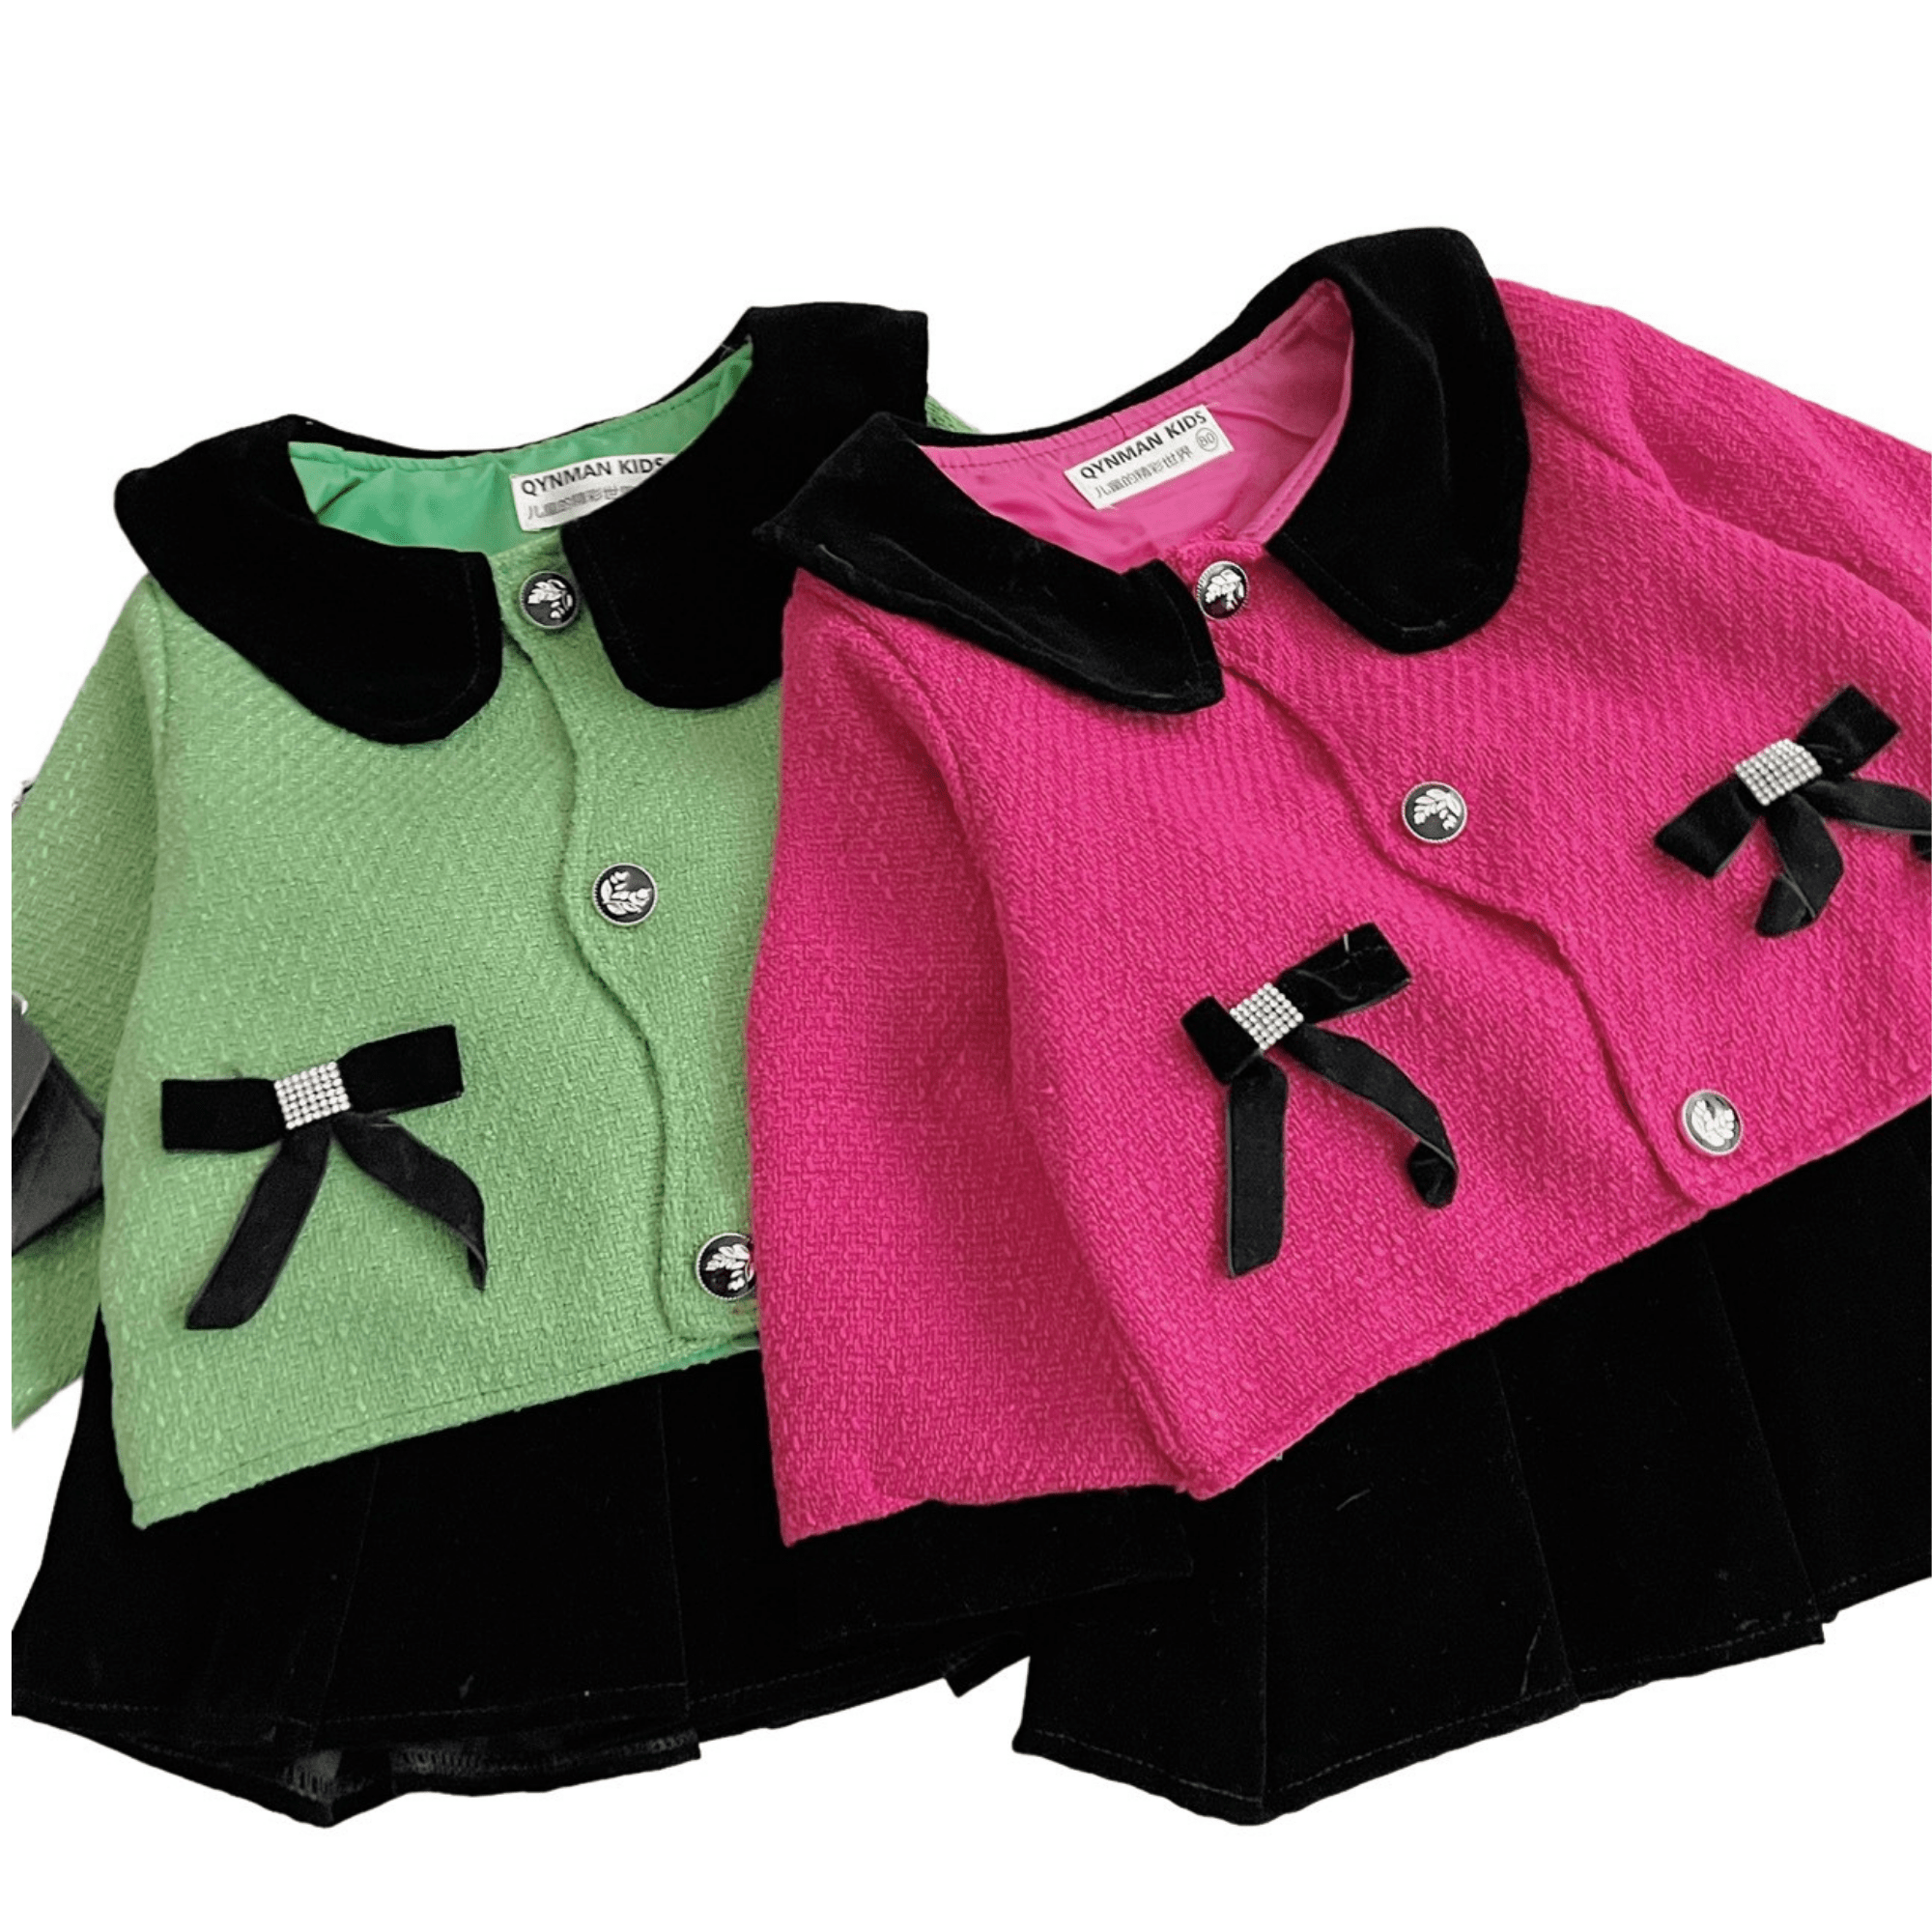 Kids Clothes Girls Customized Service 100% Wool Dresses New Arrival Each One In Opp Bag Made In Vietnam Manufacturer 4